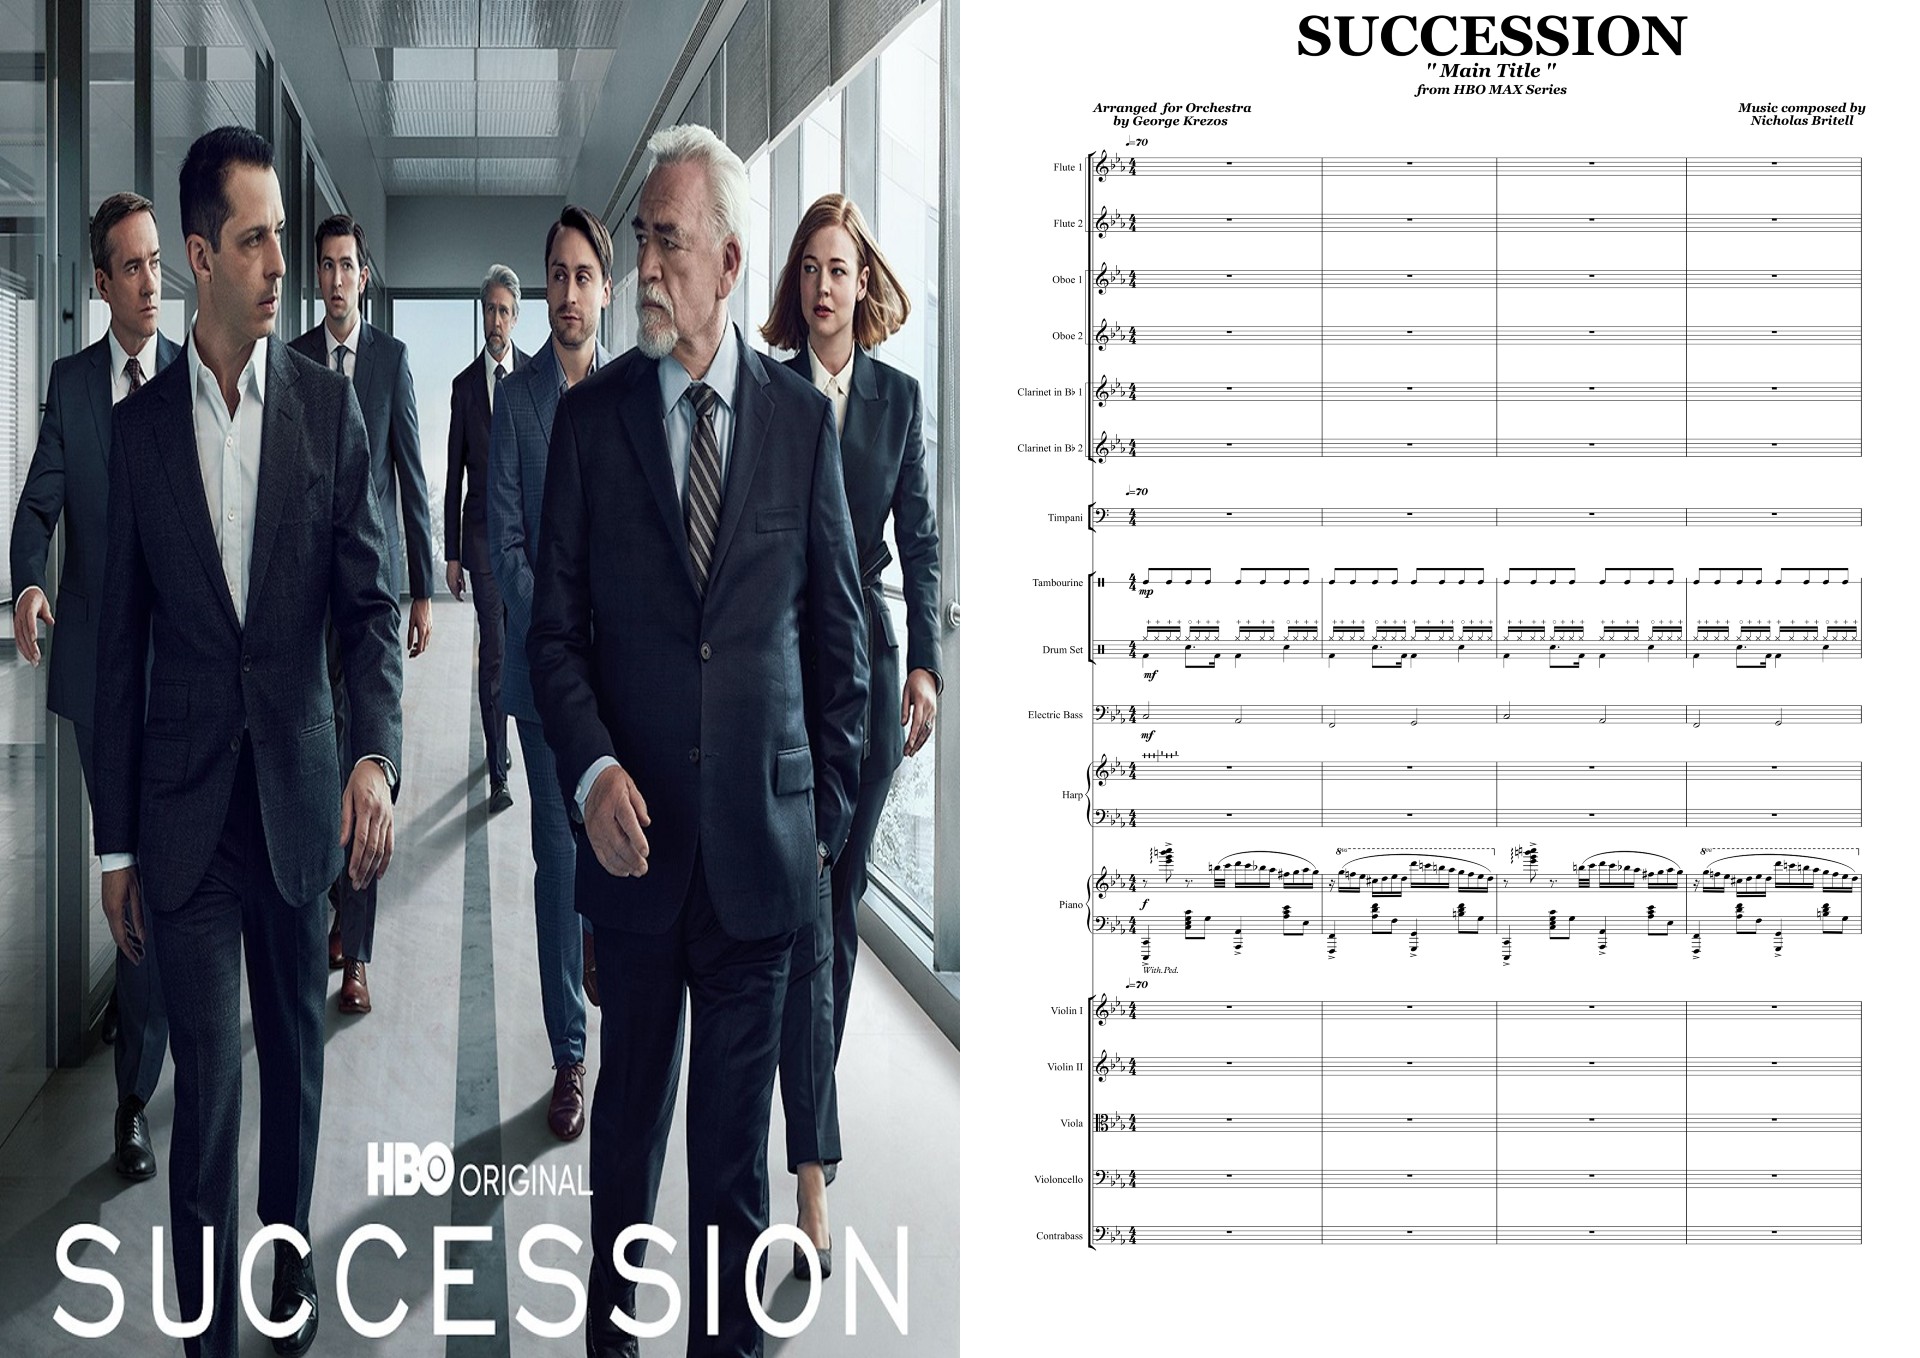 SUCCESSION - Main Title (Orchestral).jpg